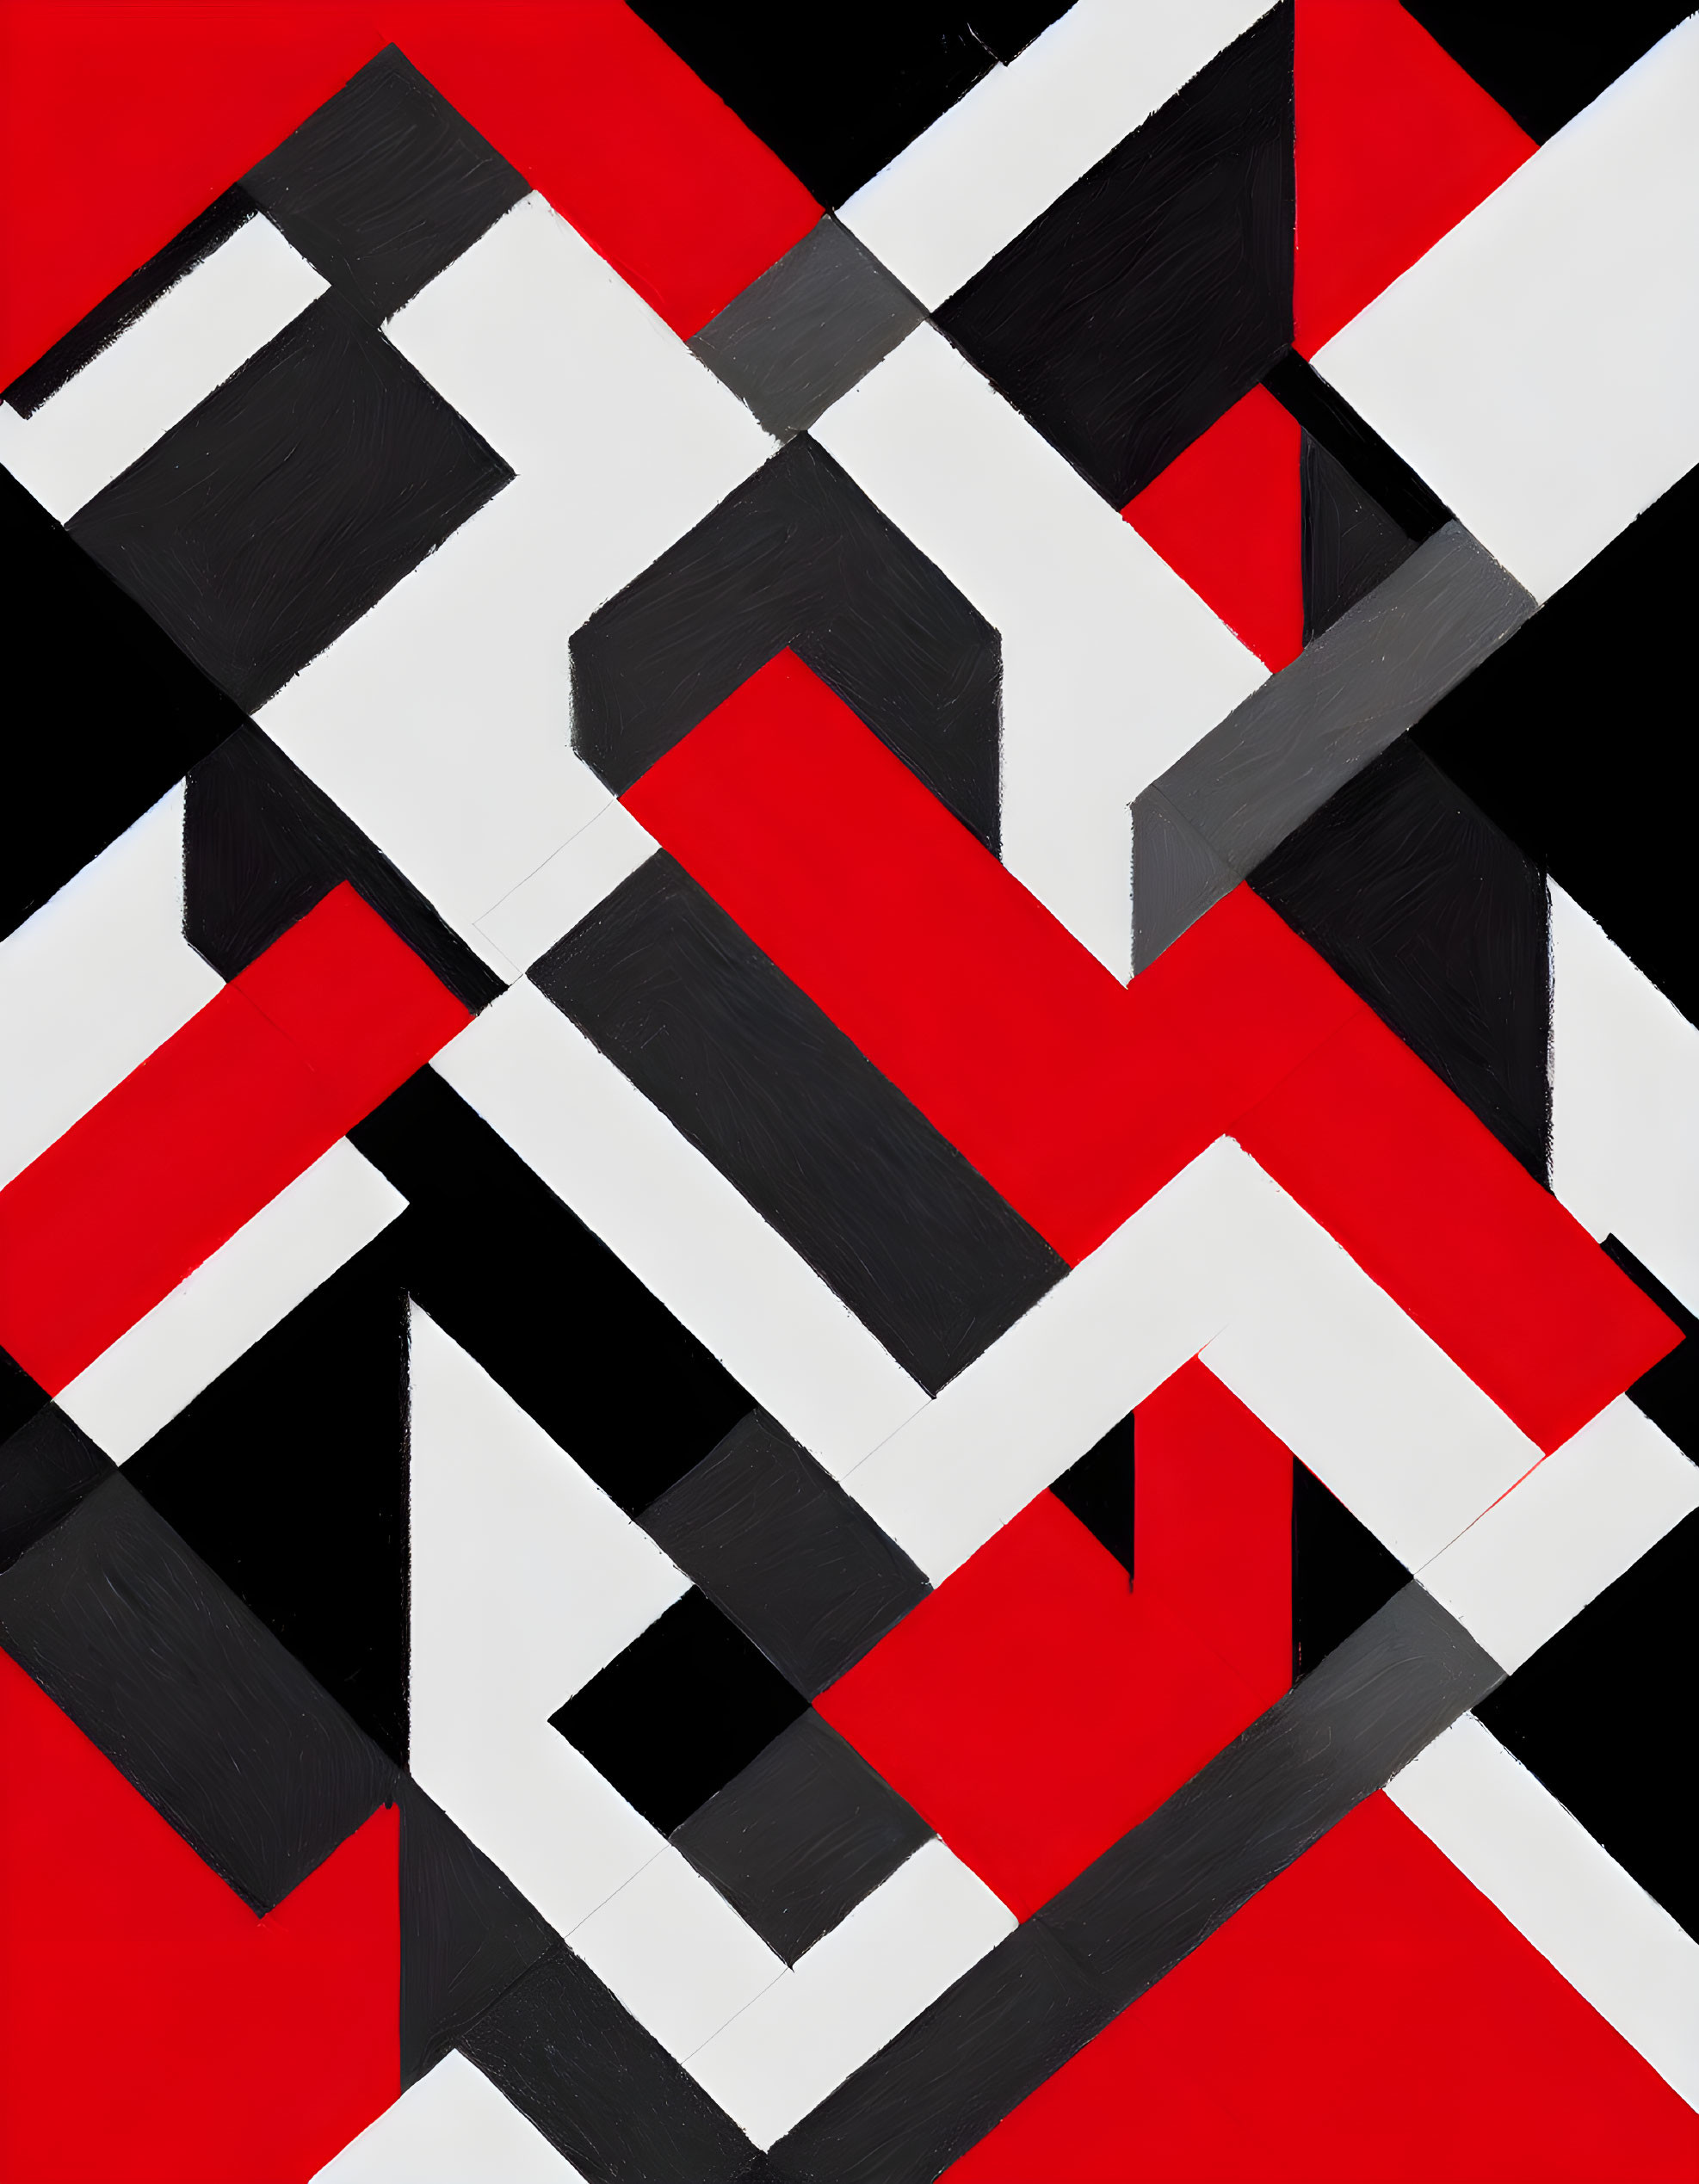 Geometric Black and White Shapes on Red Background